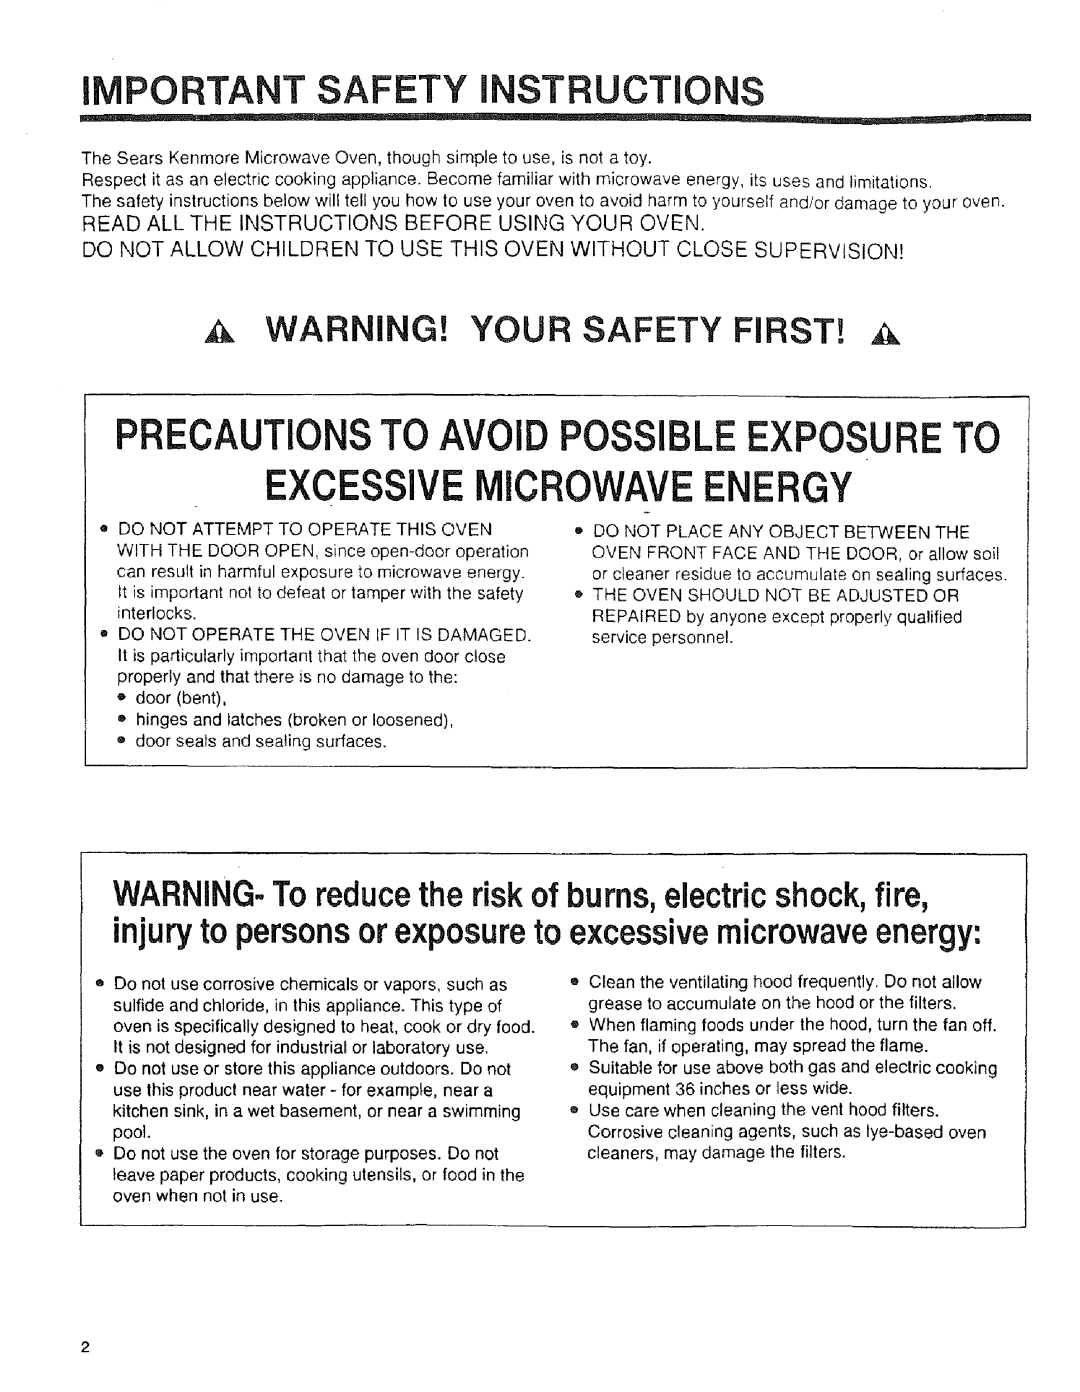 Sears 89950, 89952, 89951 manual iMPORTANT SAFETY INSTRUCTIONS, Read All The Instructions Before Using Your Oven 